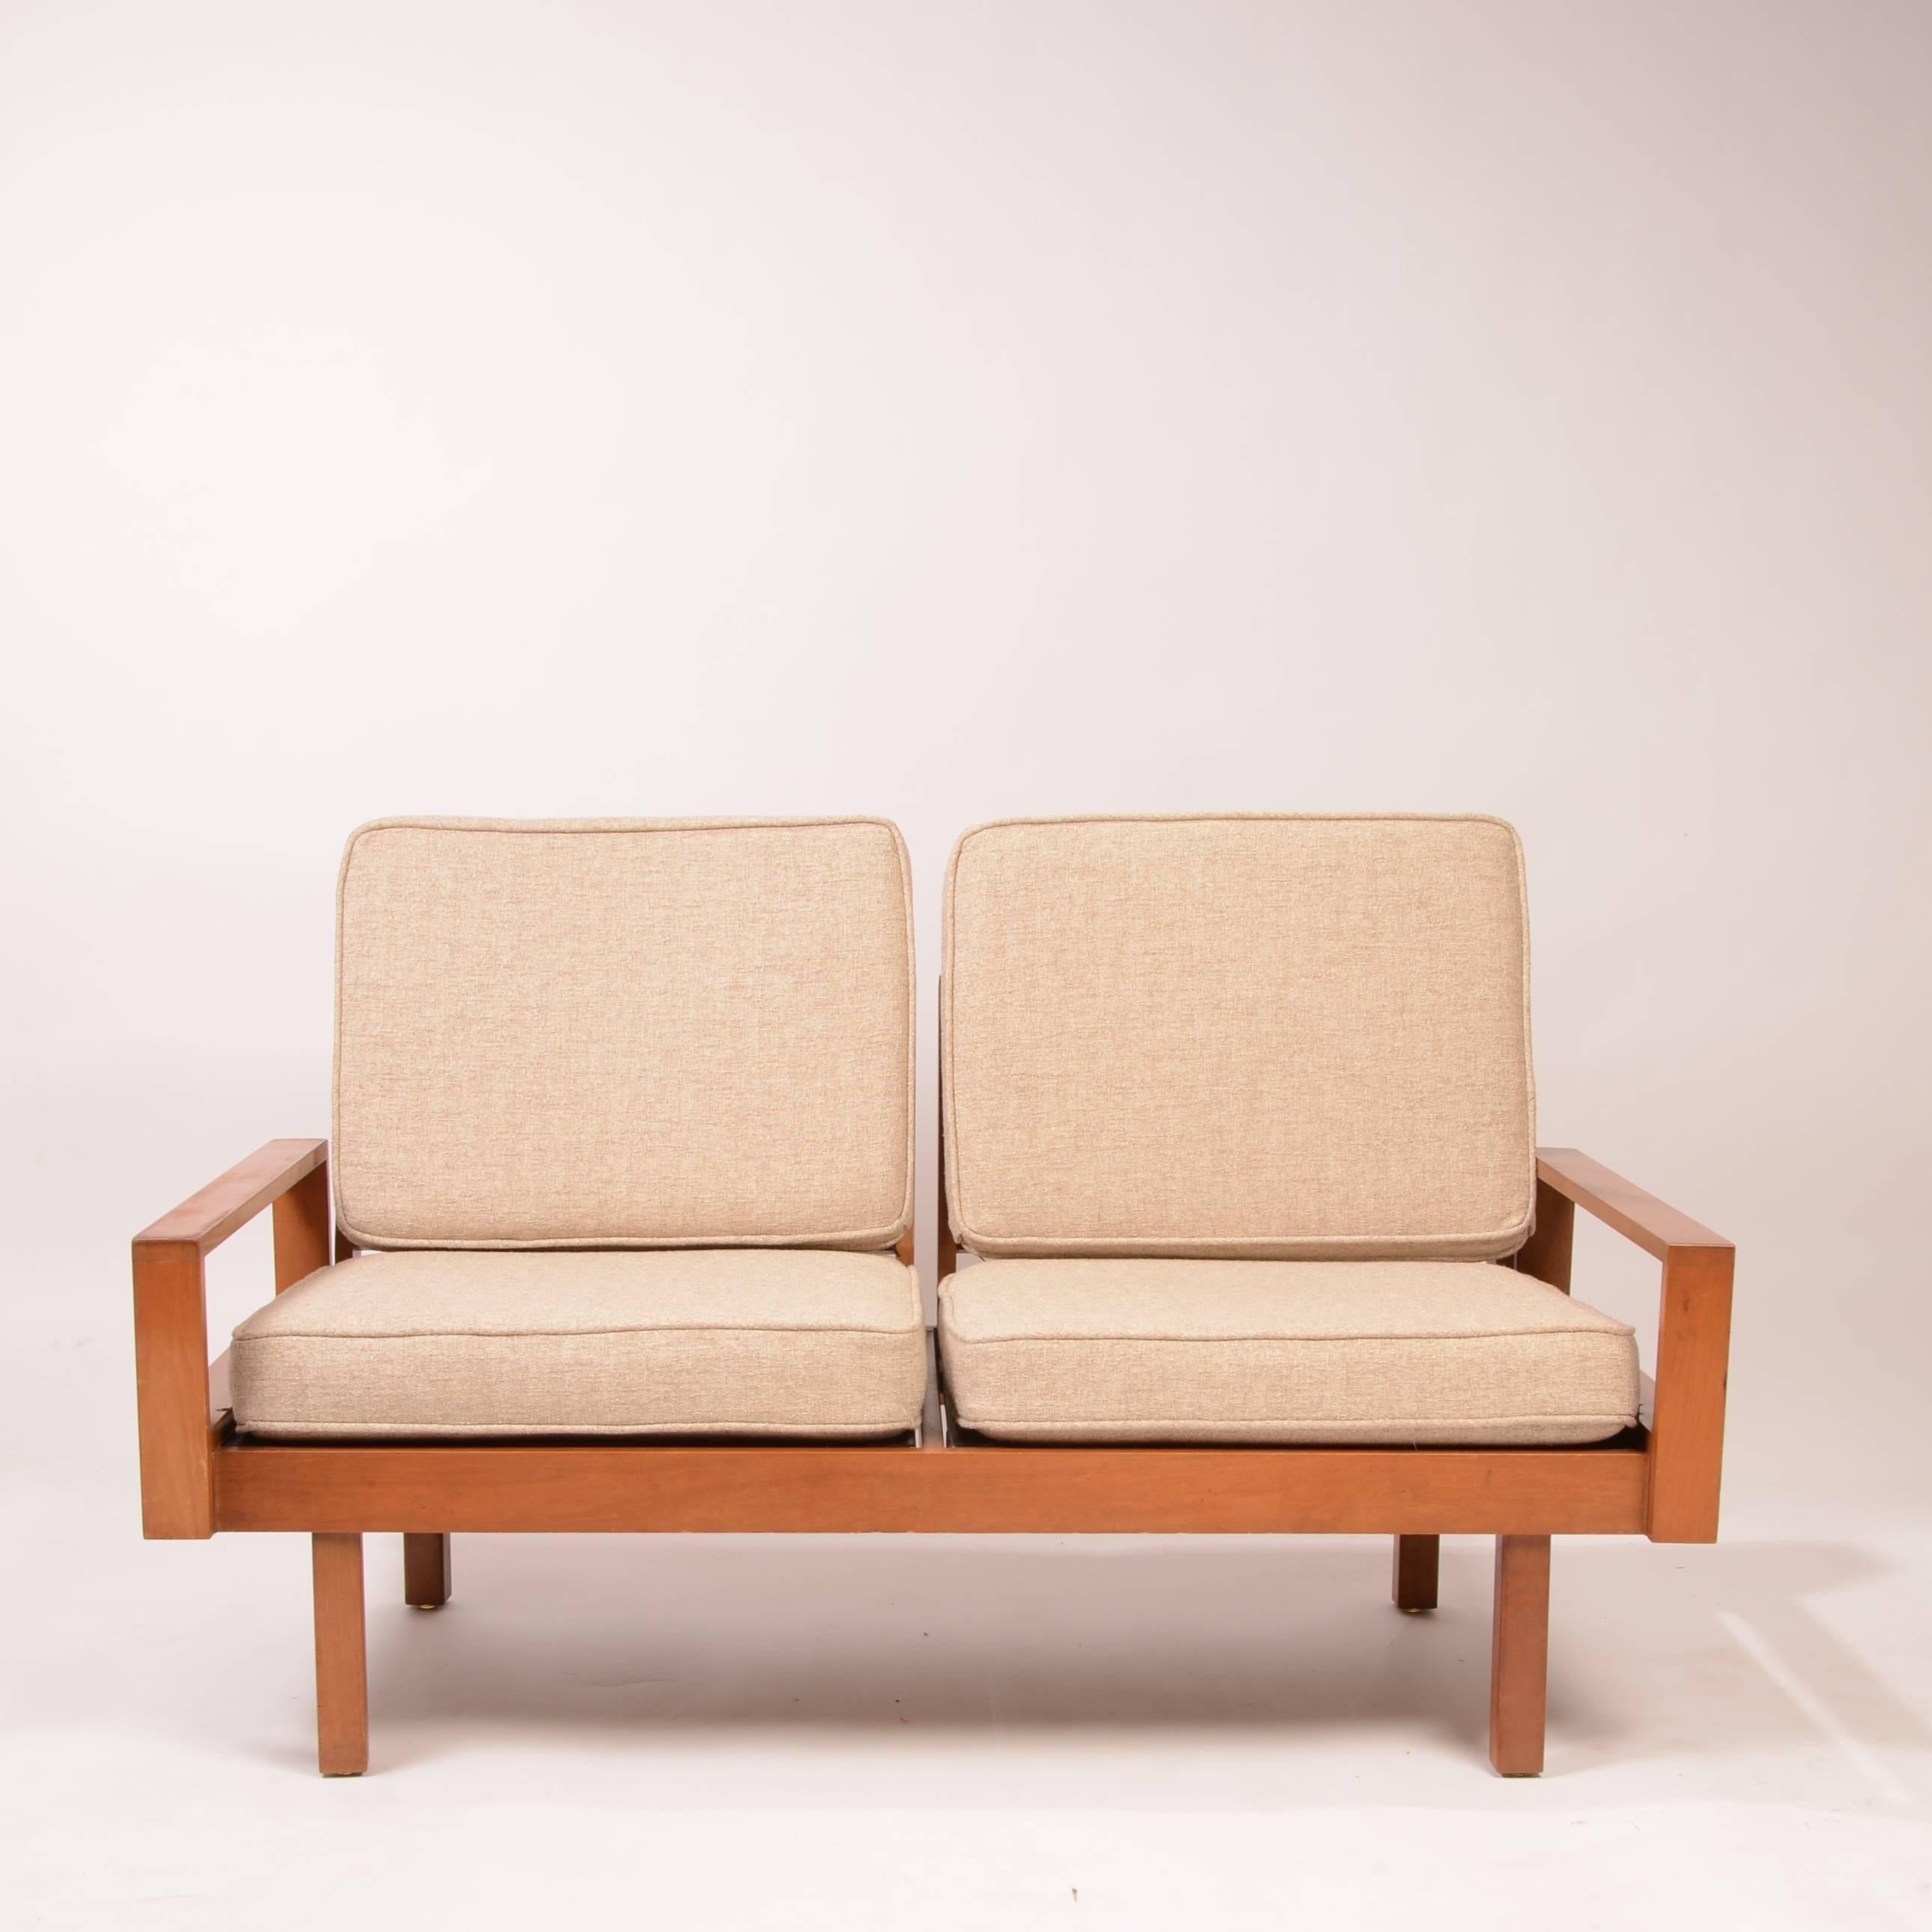 This sofa is part of a modular set by Martin Borenstein for Brown & Saltman. The seats, armrests and walnut tables of this system can be rearranged to any number of ways.  We are selling this set which includes 2 3-bay units, 2 2-bay units, and this